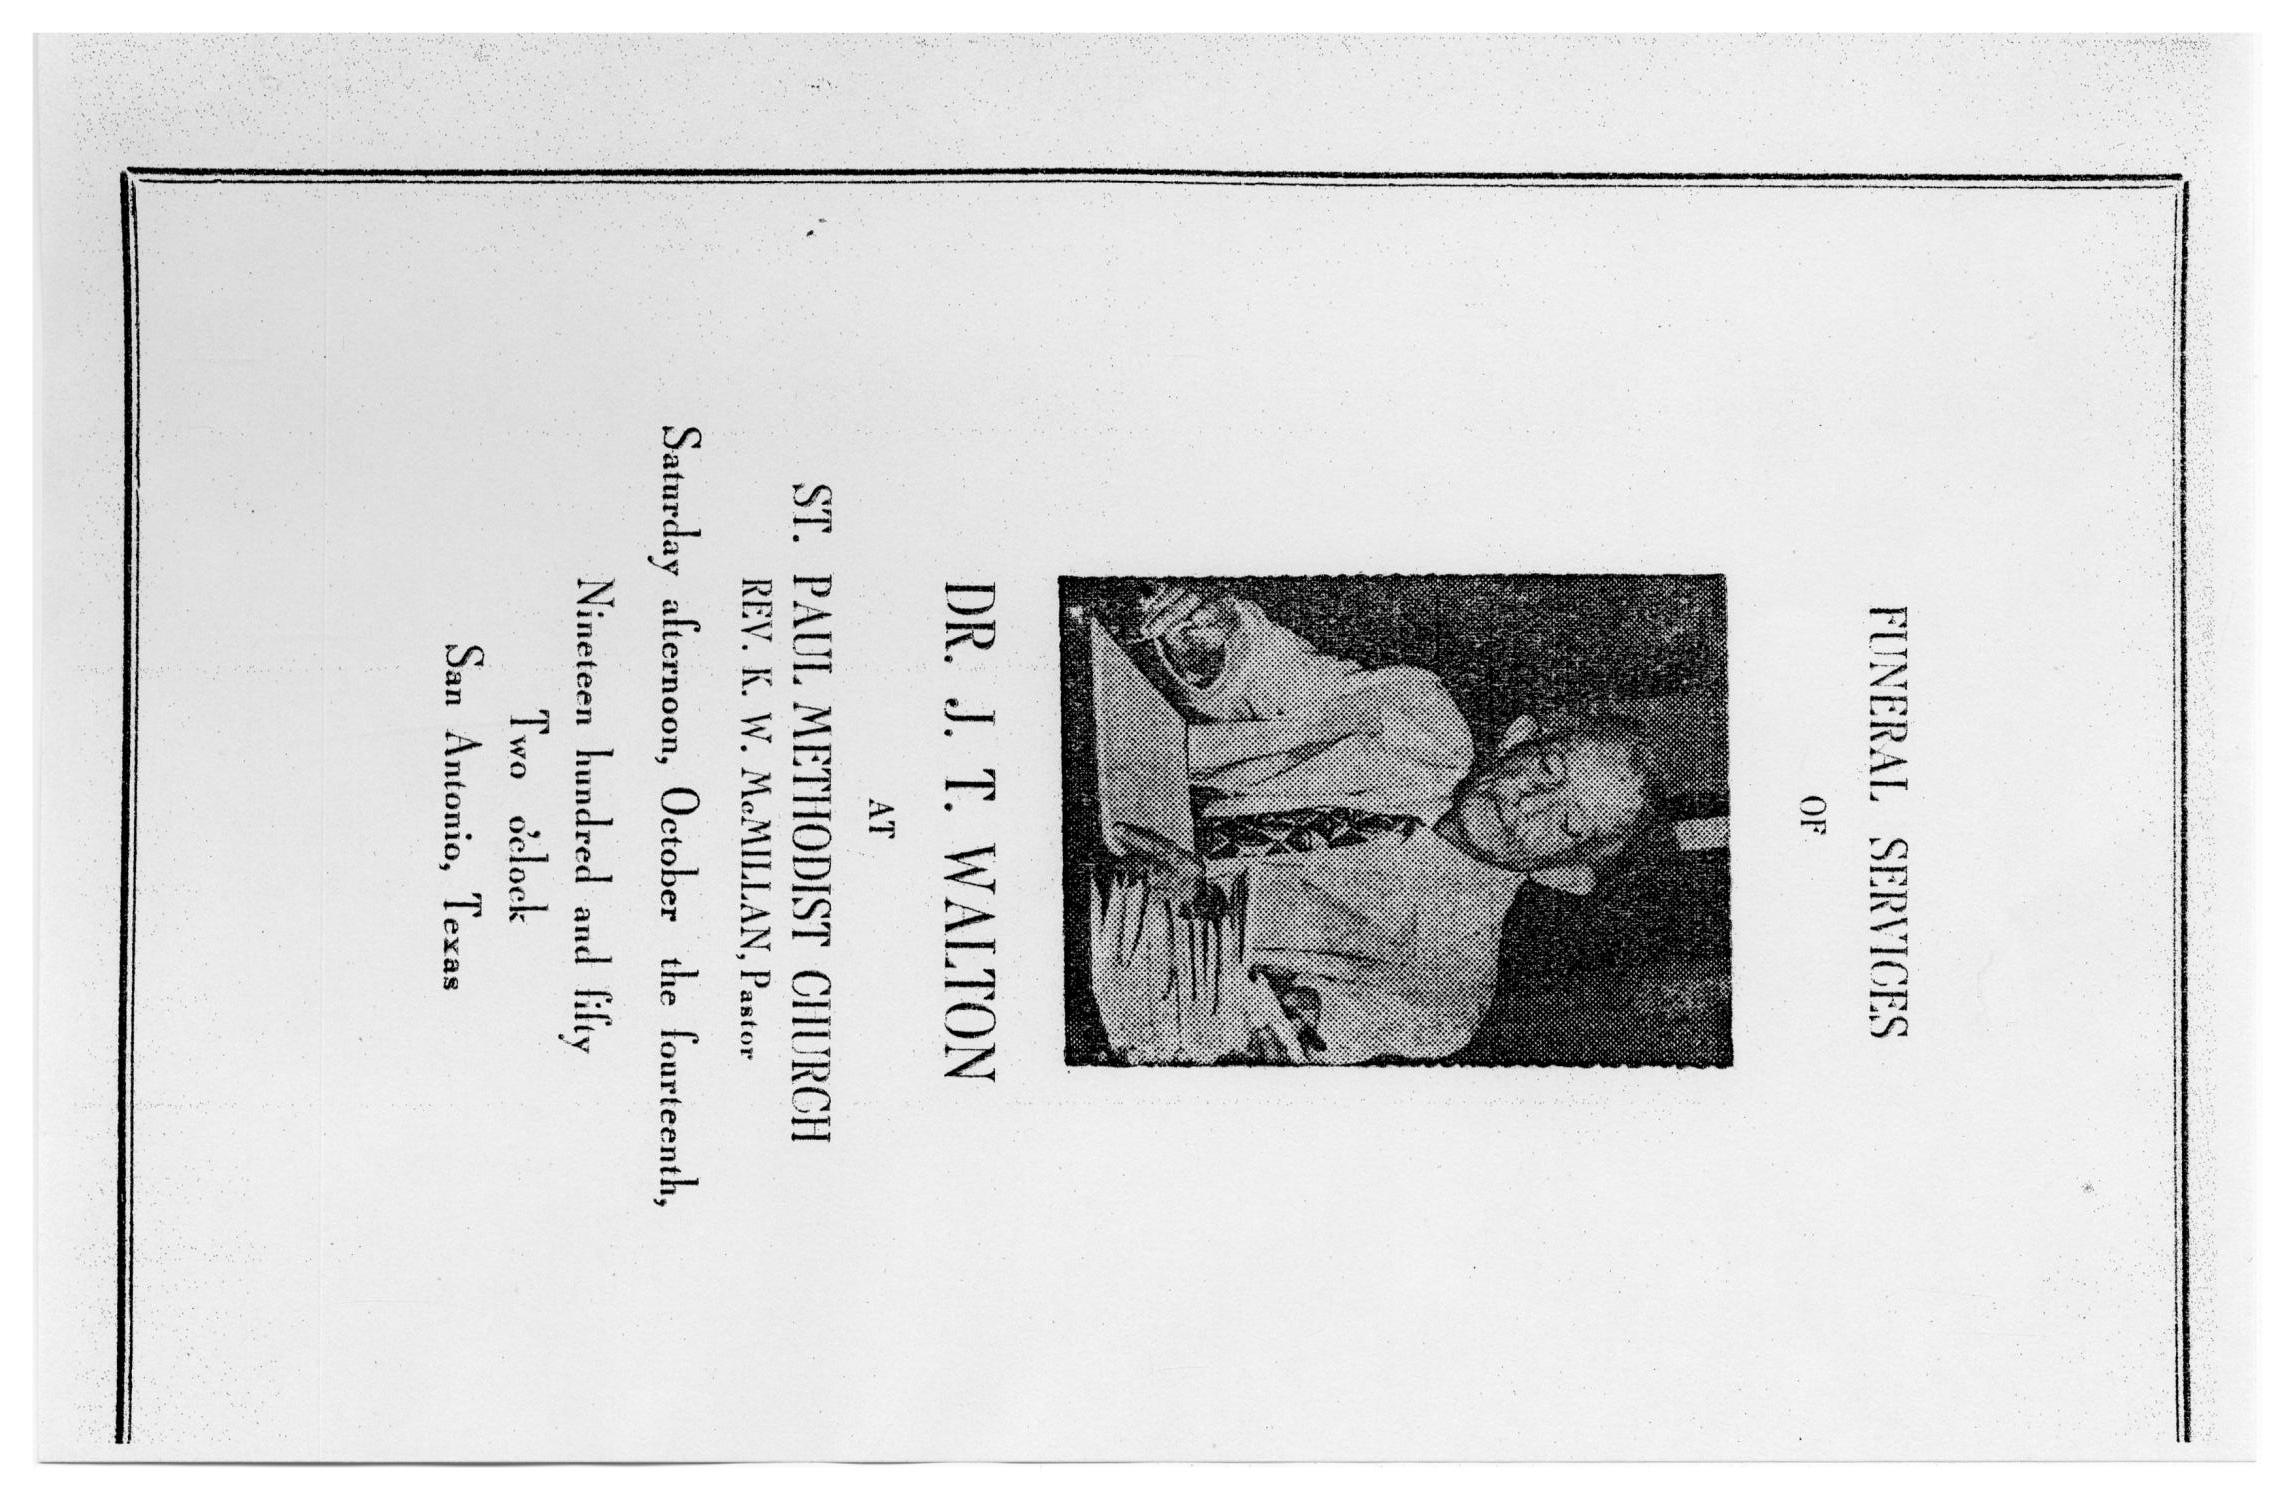 [Funeral Program for J. T. Walton, October 14, 1950]
                                                
                                                    [Sequence #]: 1 of 3
                                                